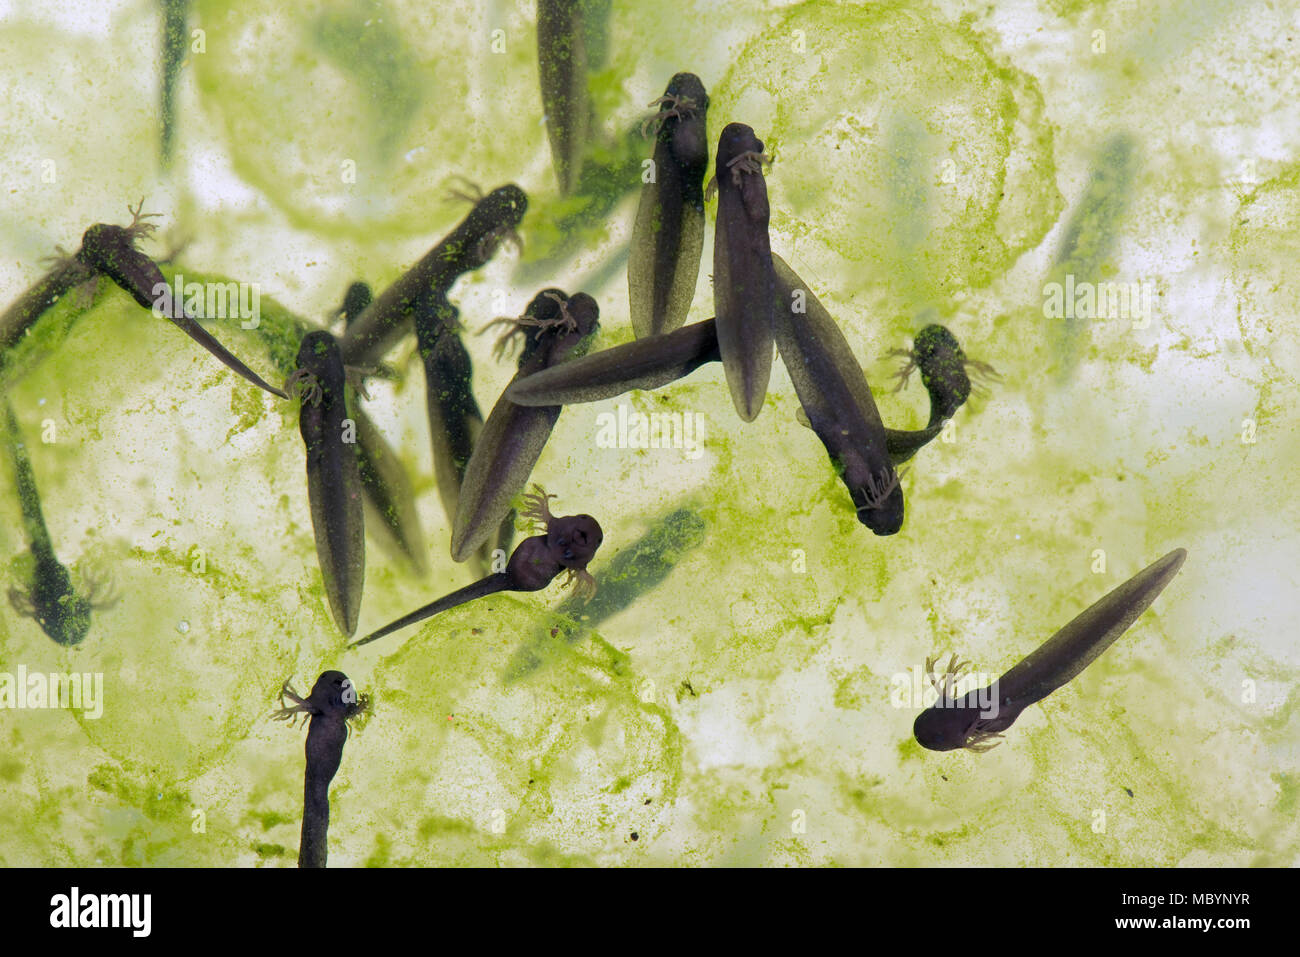 European common frog, Rana temporaria, frogspawn with hatched and hatching tadpoles, April Stock Photo